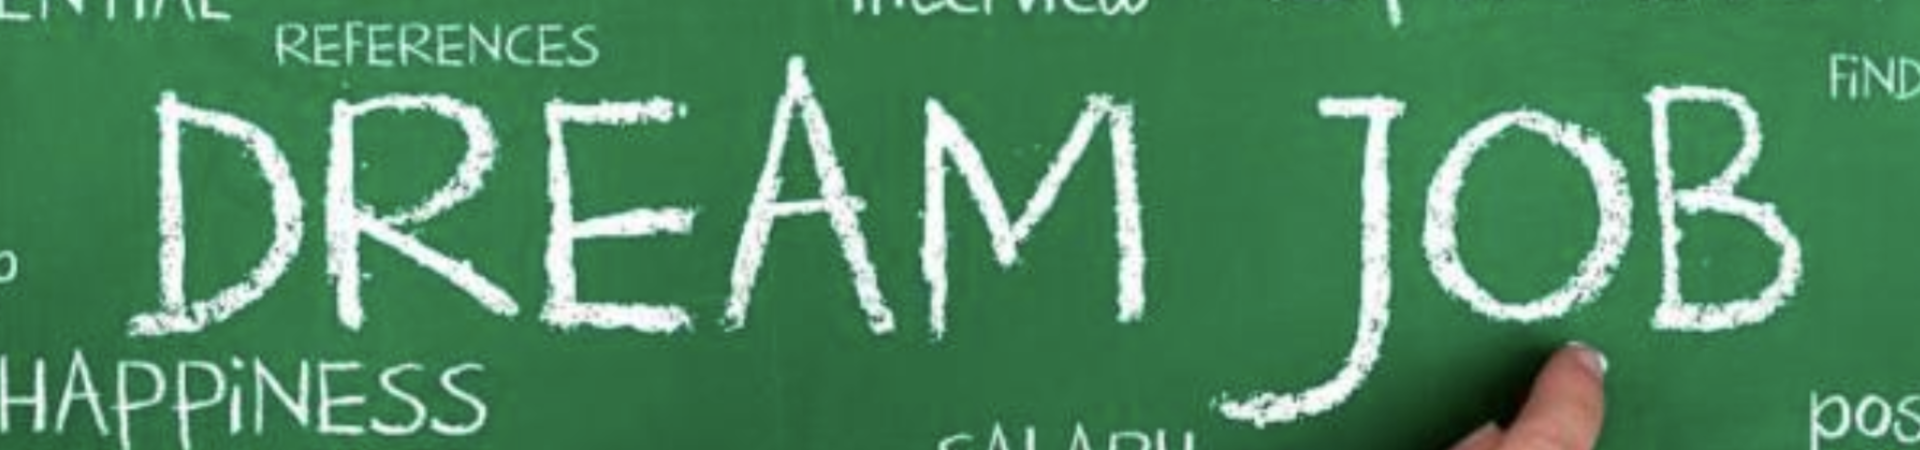 Image shows a person's hand holding chalk and writing "Dream Job" on a chalkboard